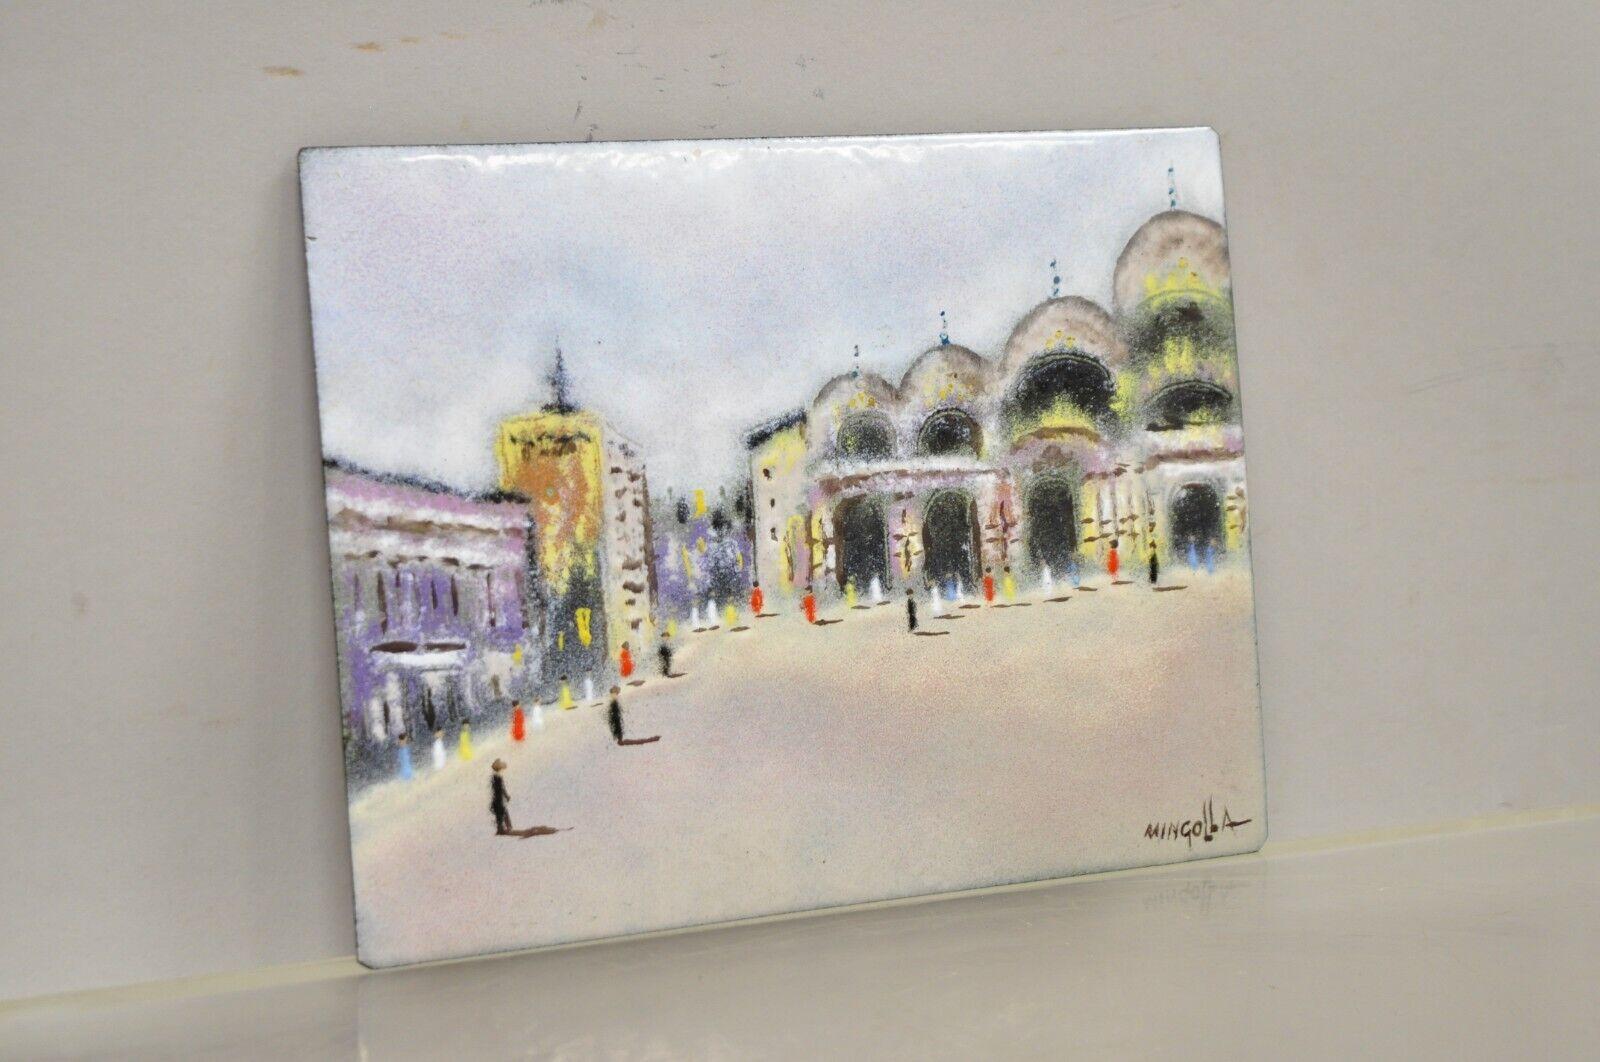 Dom Dominic Mingolla Enamel on Copper Small Painting Notre Dame? Cathderal For Sale 3